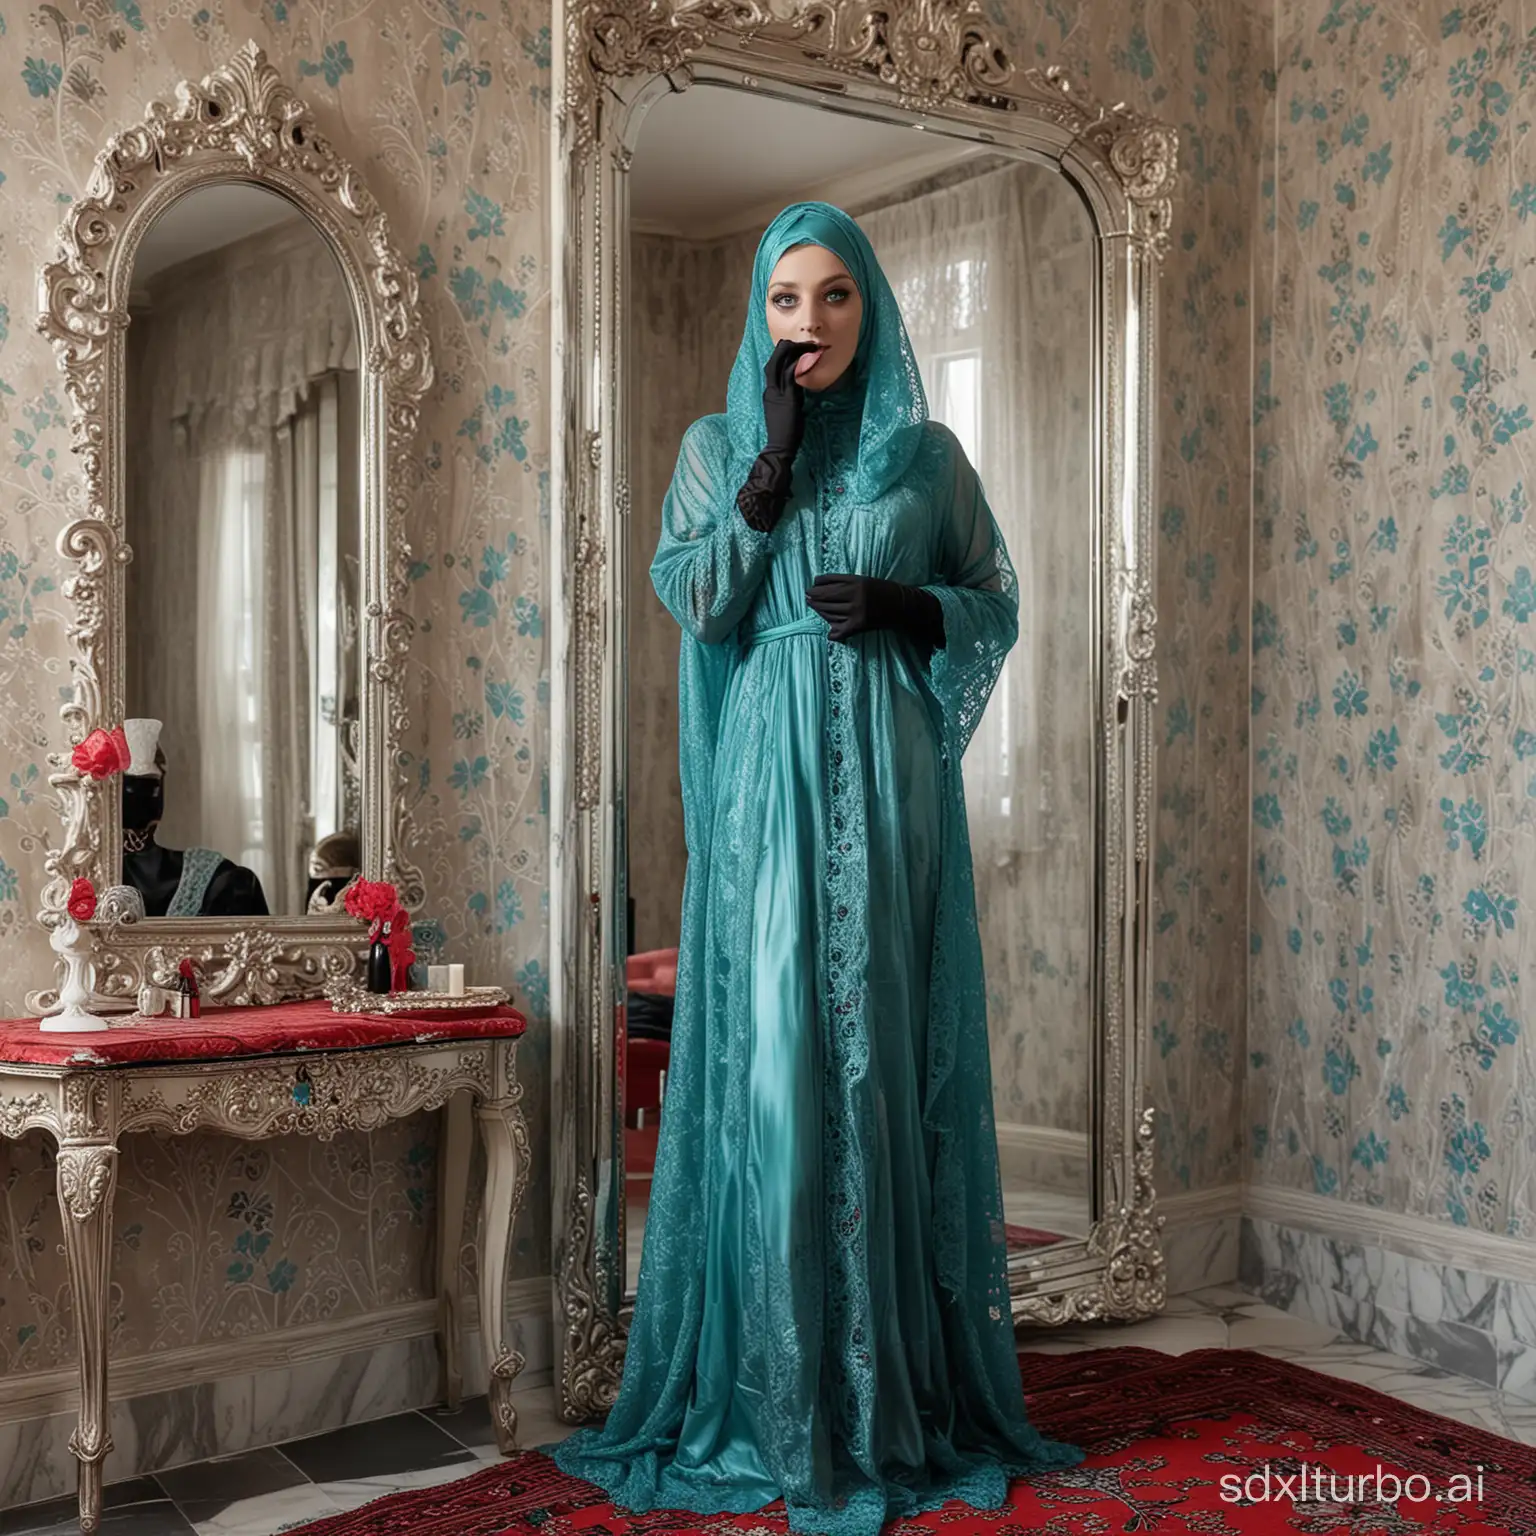 feminized man, sissy standing, small chest, Personality erased and encased in a long fully turquoise burka, blue eyes, mask over mouth, transparent lace veil mask over eyes, high-heeled shoes. Black gloves. Luxury bedroom, marble wall, with red satin bed. Mirror in the background.